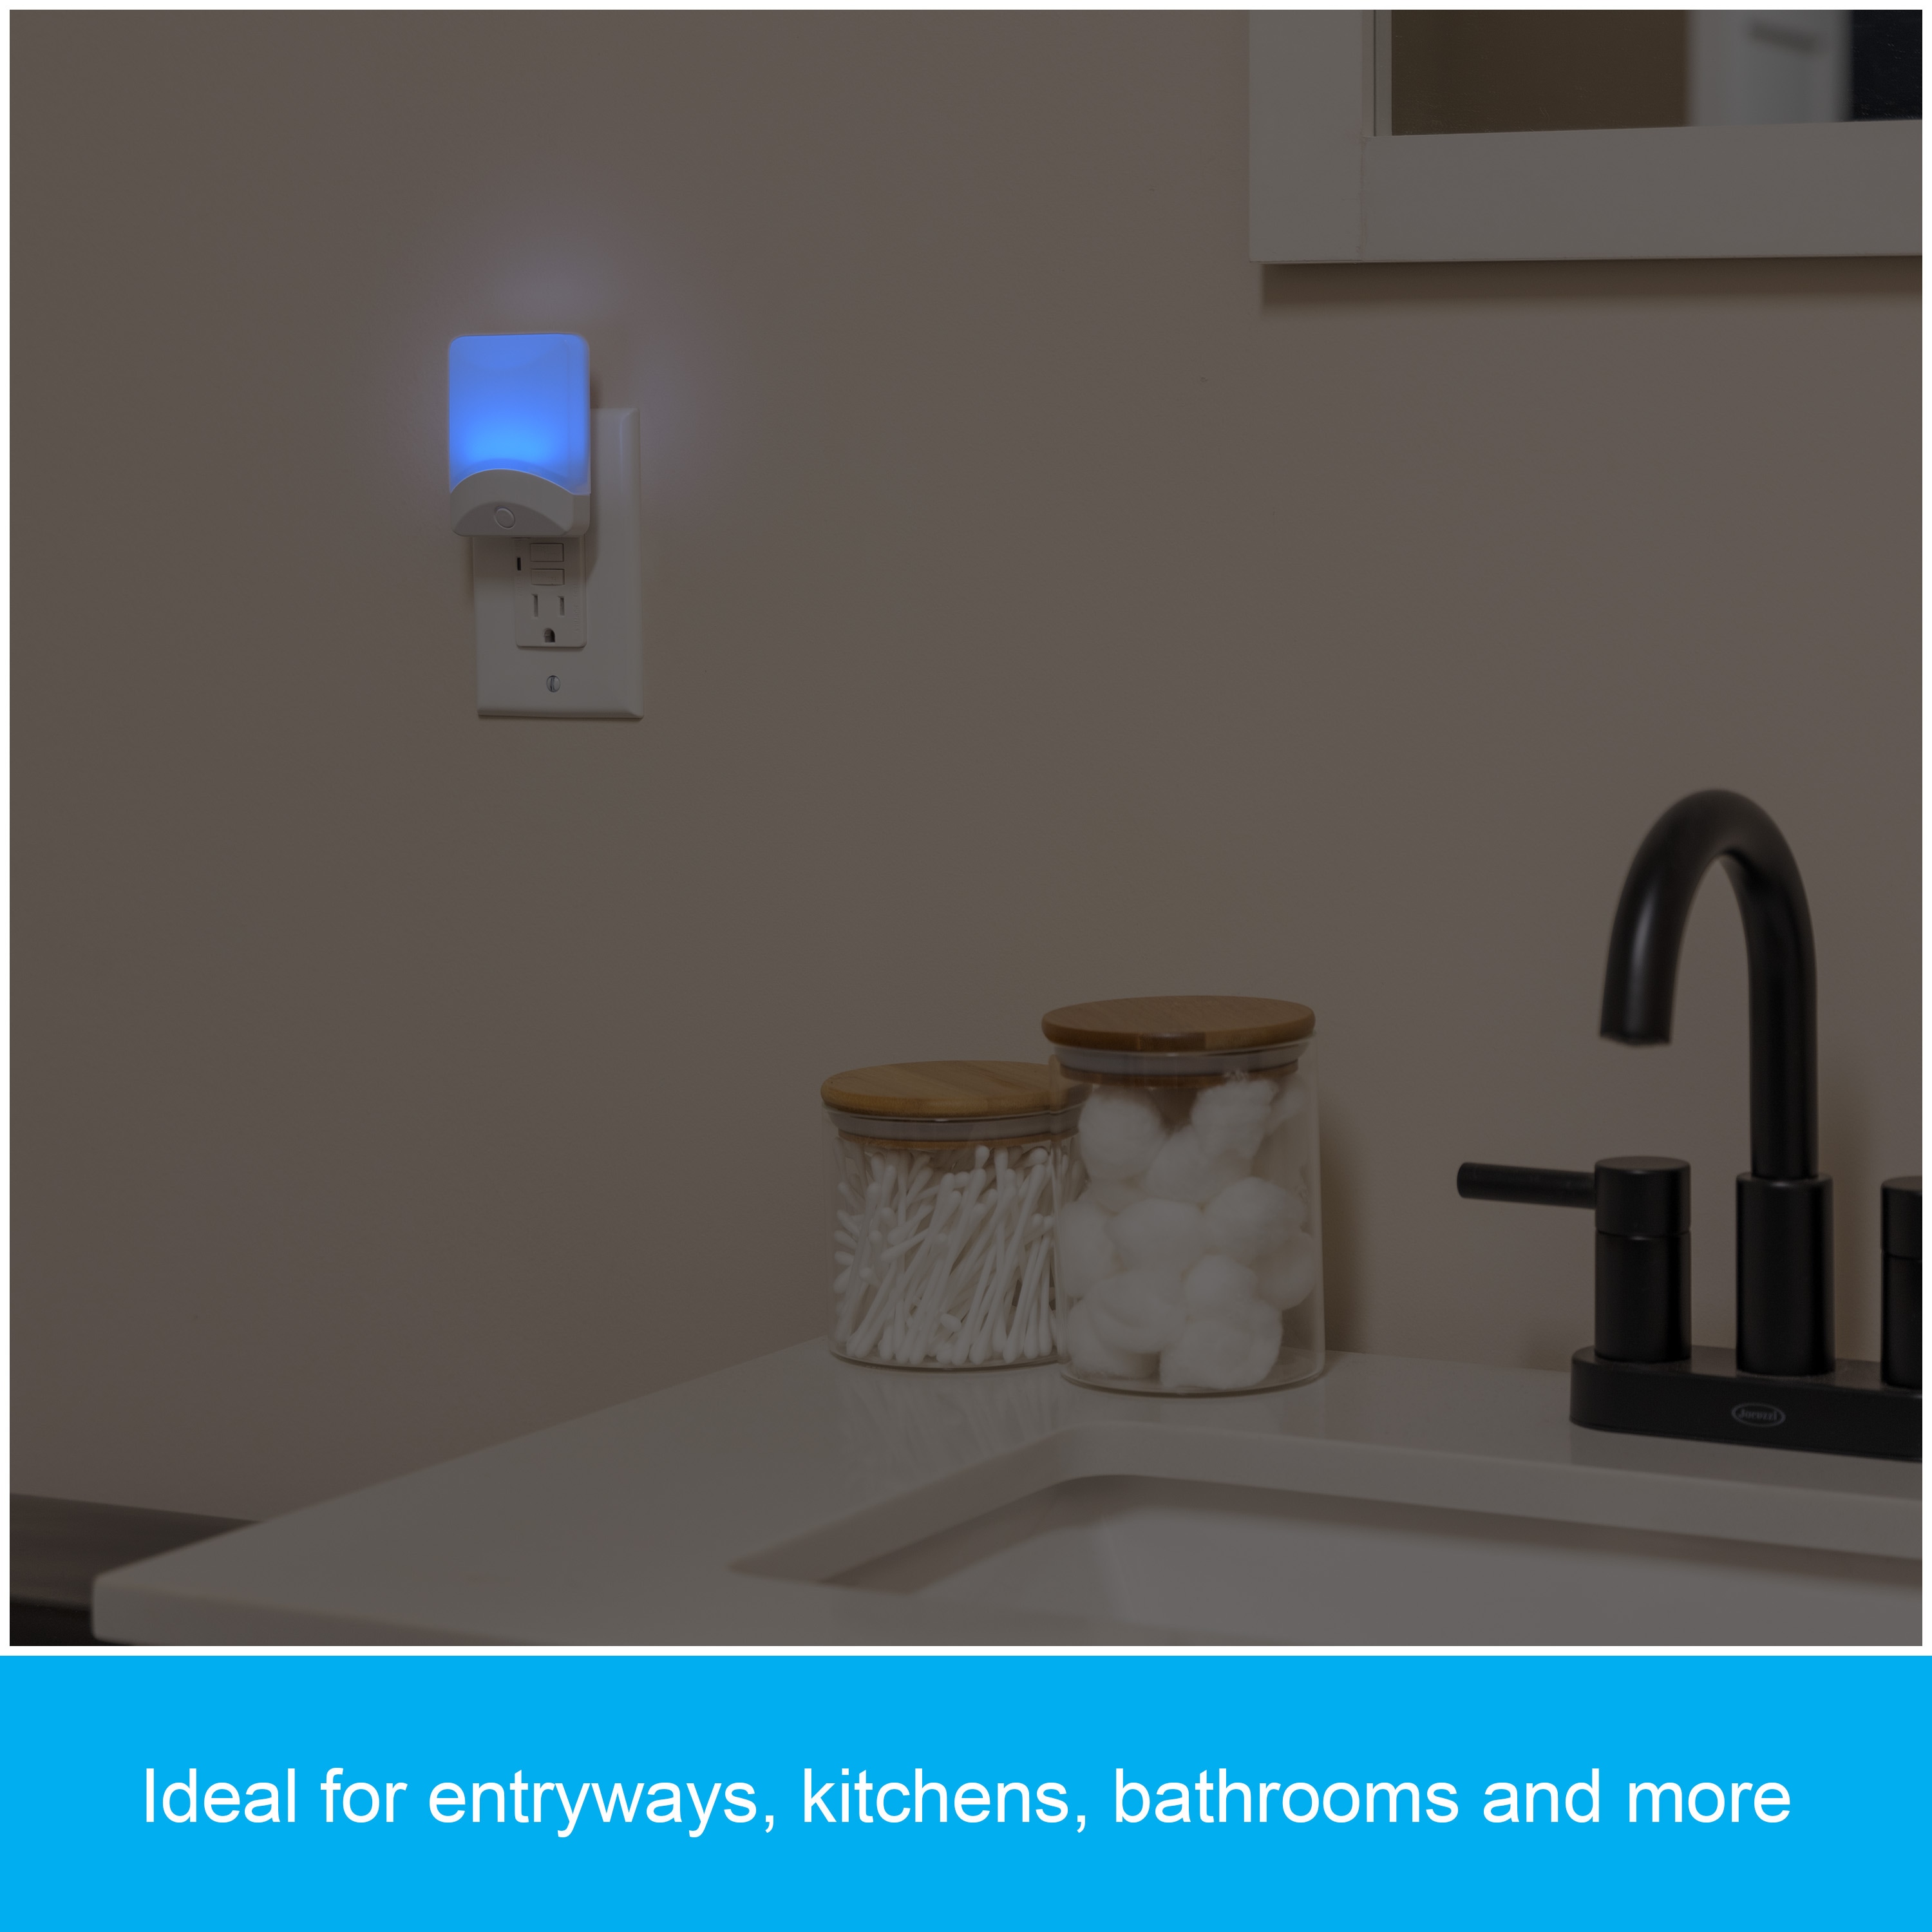 6 Pack Blue Bright Night Light, Dusk to Dawn PlugLED Night Lights Plug into  Wall, Night Lights for The Home Plug In for Kids, Bedroom